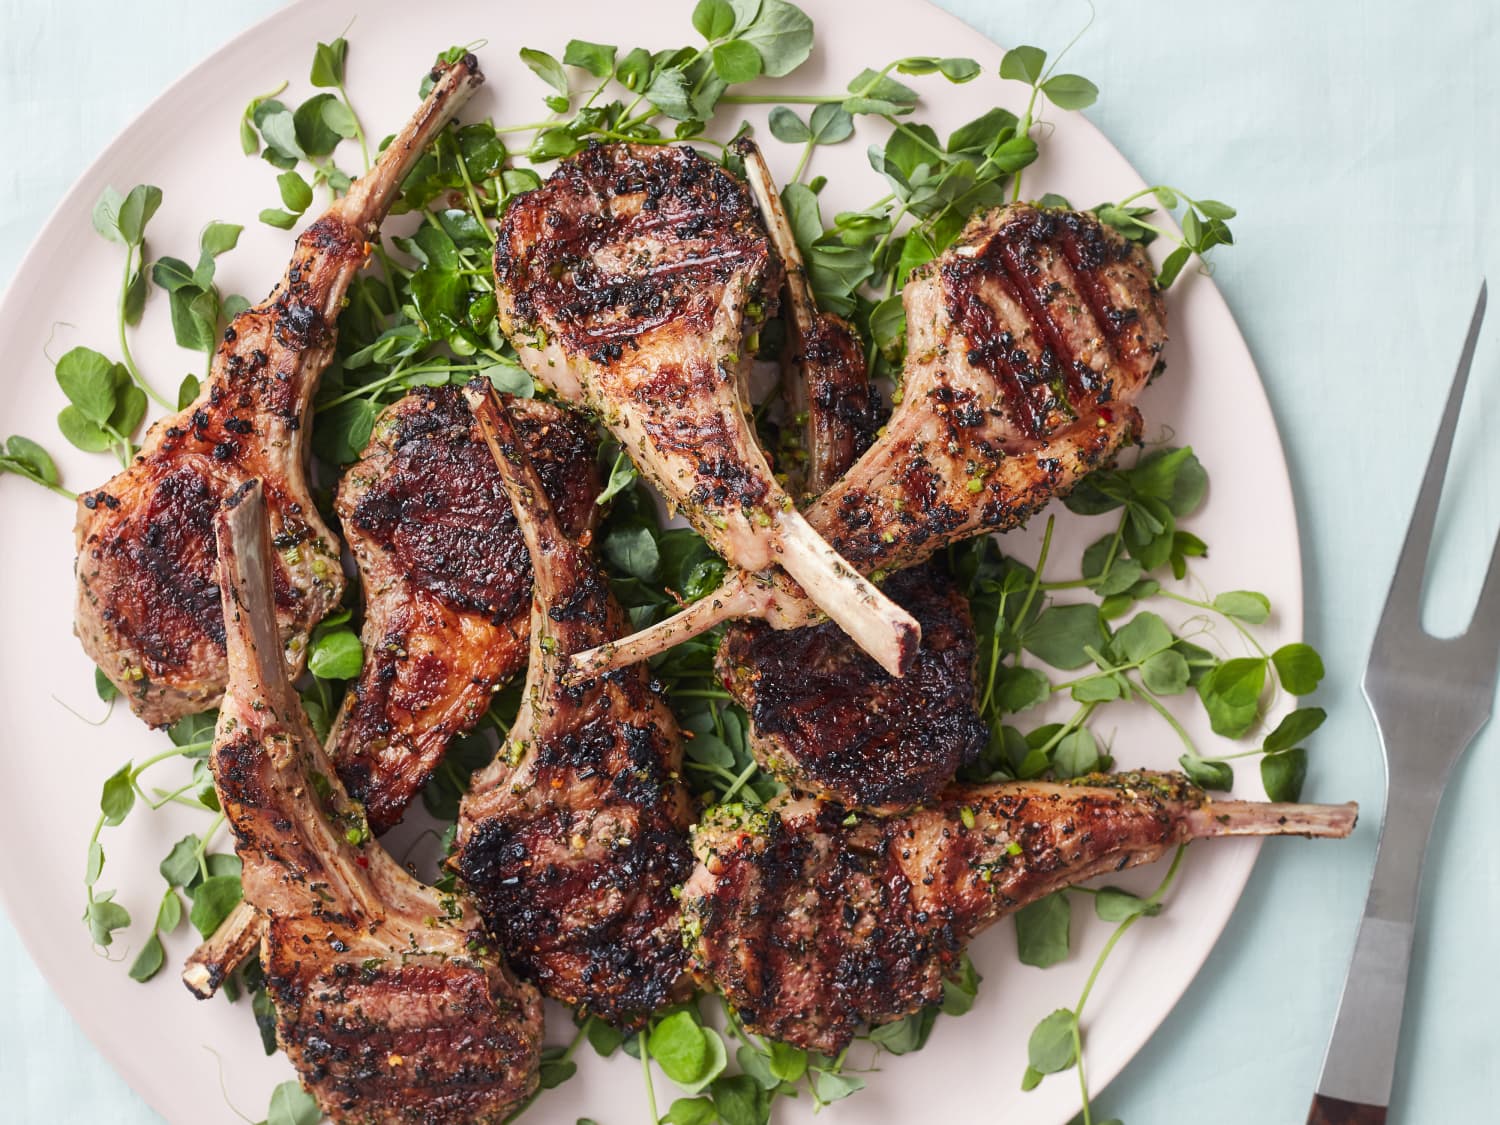 https://cdn.apartmenttherapy.info/image/upload/f_jpg,q_auto:eco,c_fill,g_auto,w_1500,ar_4:3/k%2FPhoto%2FRecipes%2F2021-03-easter-lamb-chops%2F2021_easter_grilled_lambchops_shot1_067